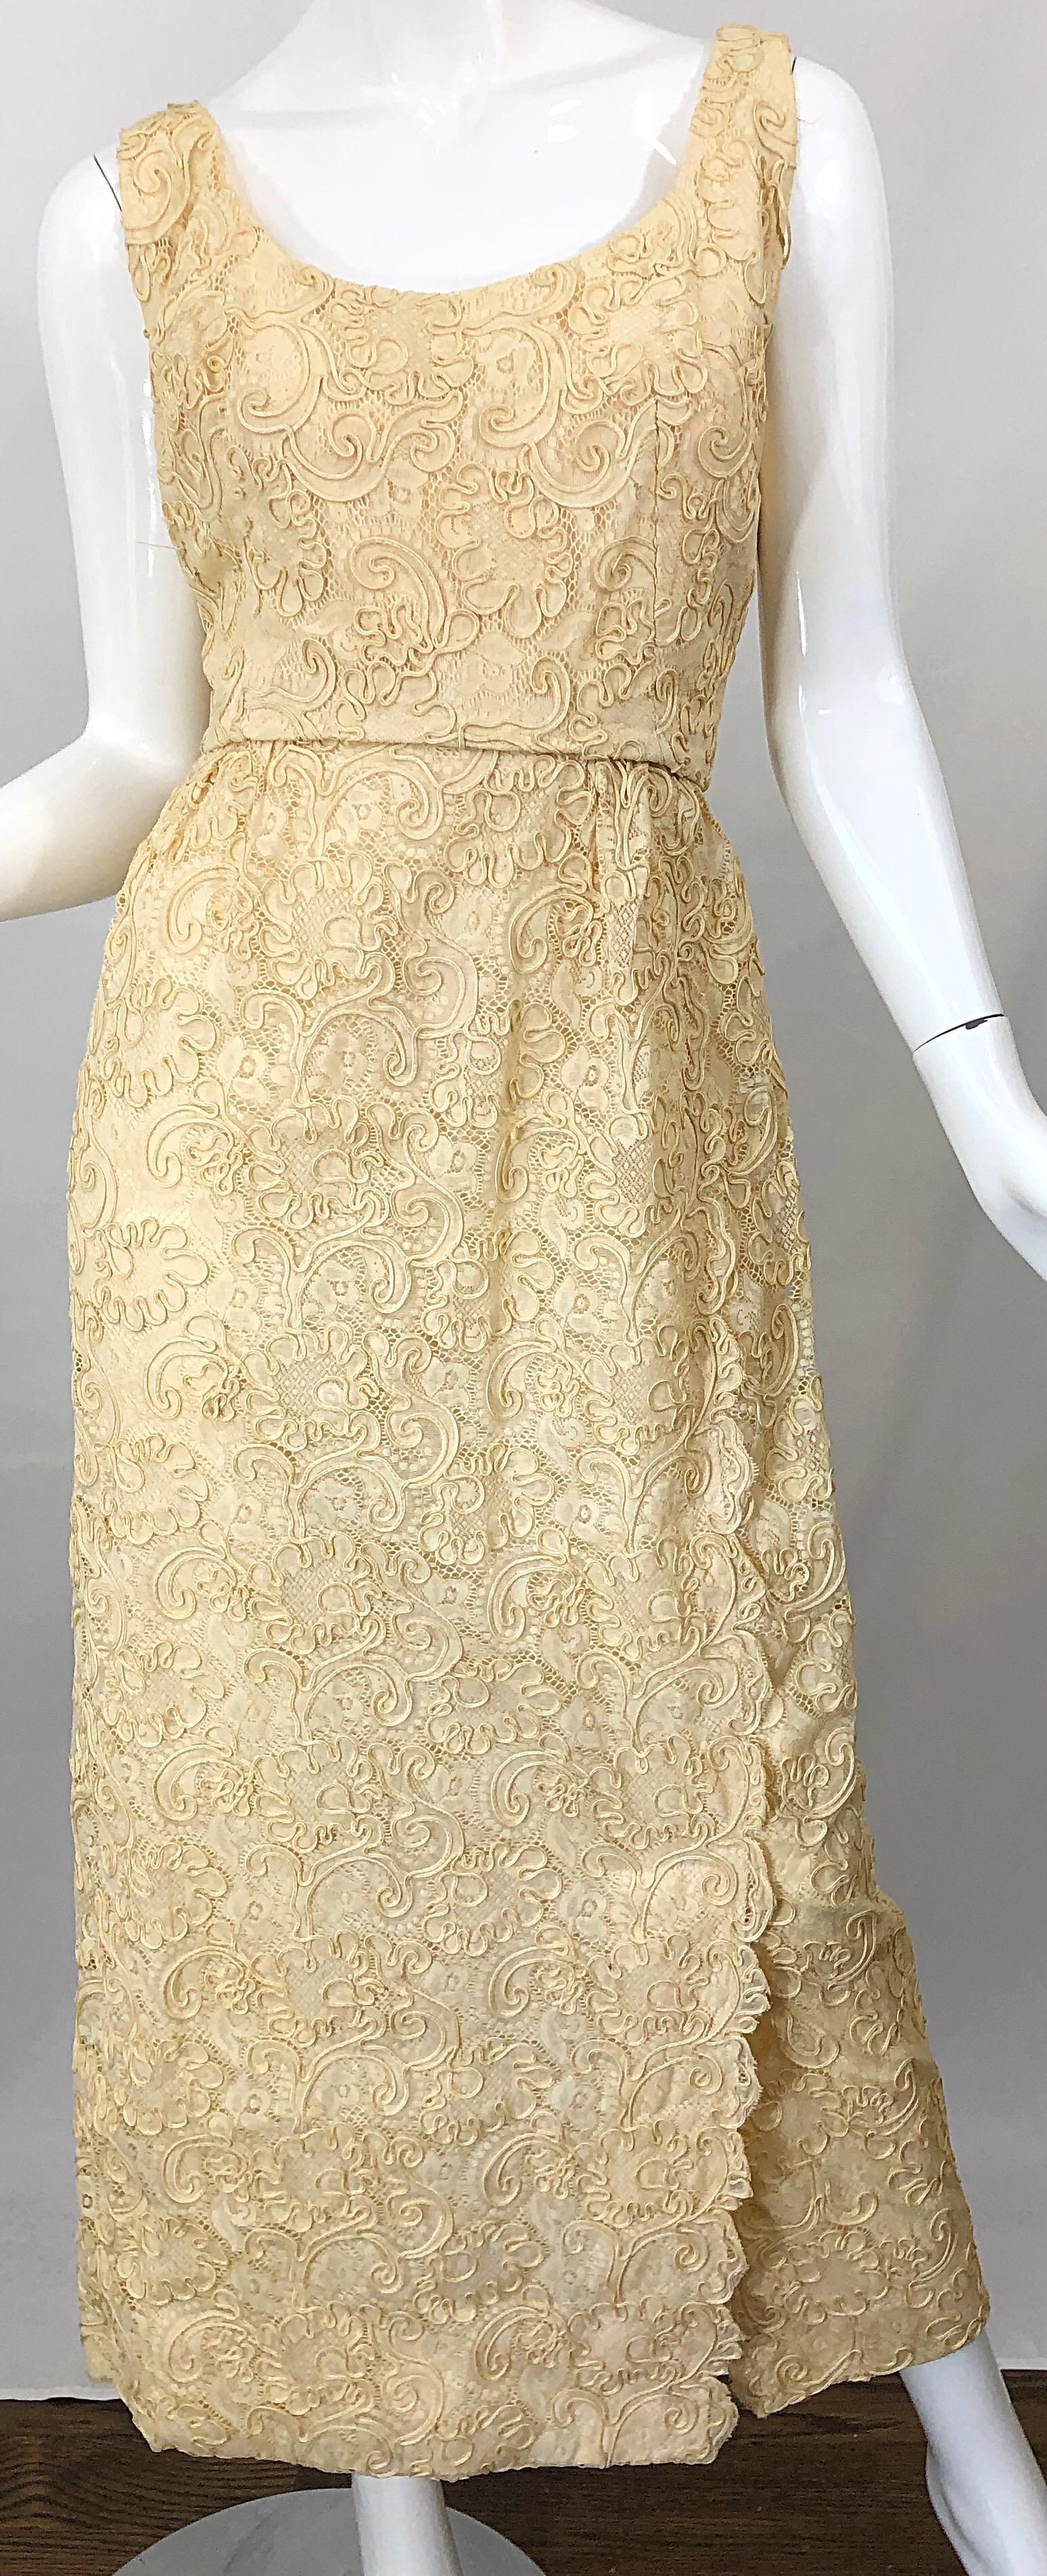 Beautiful vintage 1960s MALCOLM STARR pale light yellow silk lace embroidered sleeveless gown / maxi dress! Features intricately embroidered lace throughout. Tailored bodice with a generous fuller skirt. Chic velvet strap and bow detail at back